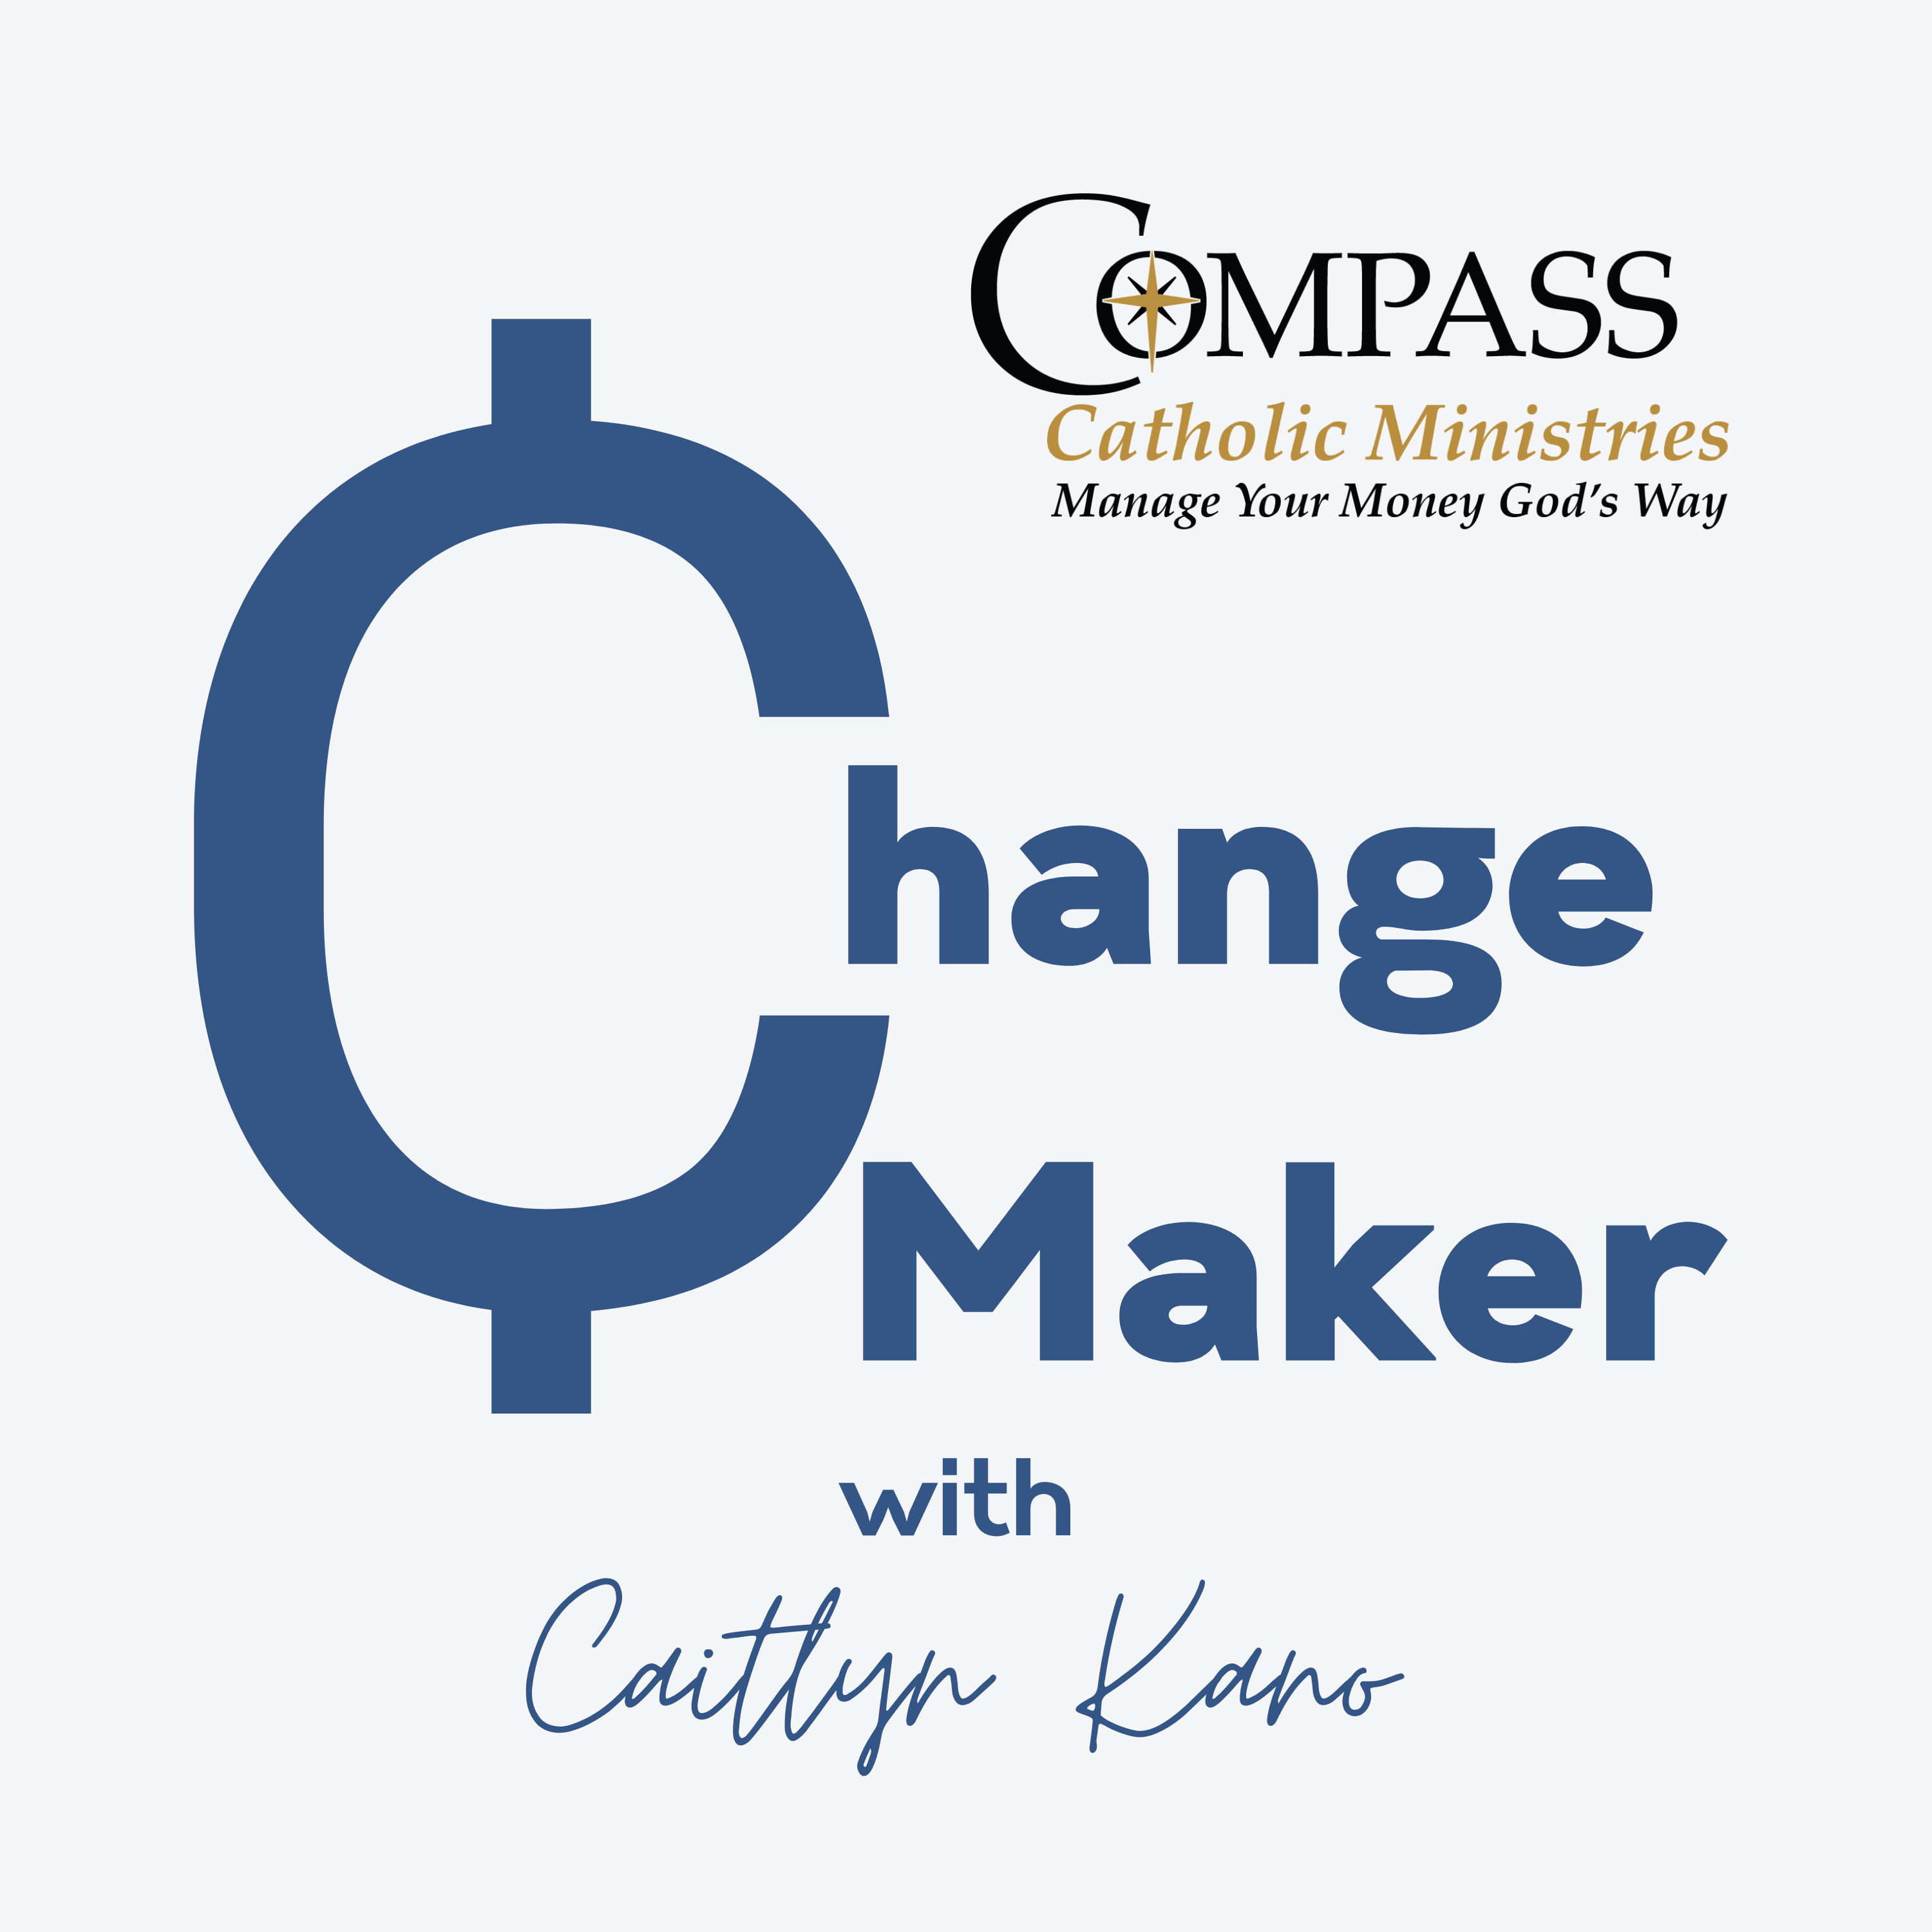 Change Maker by Compass Catholic Ministries